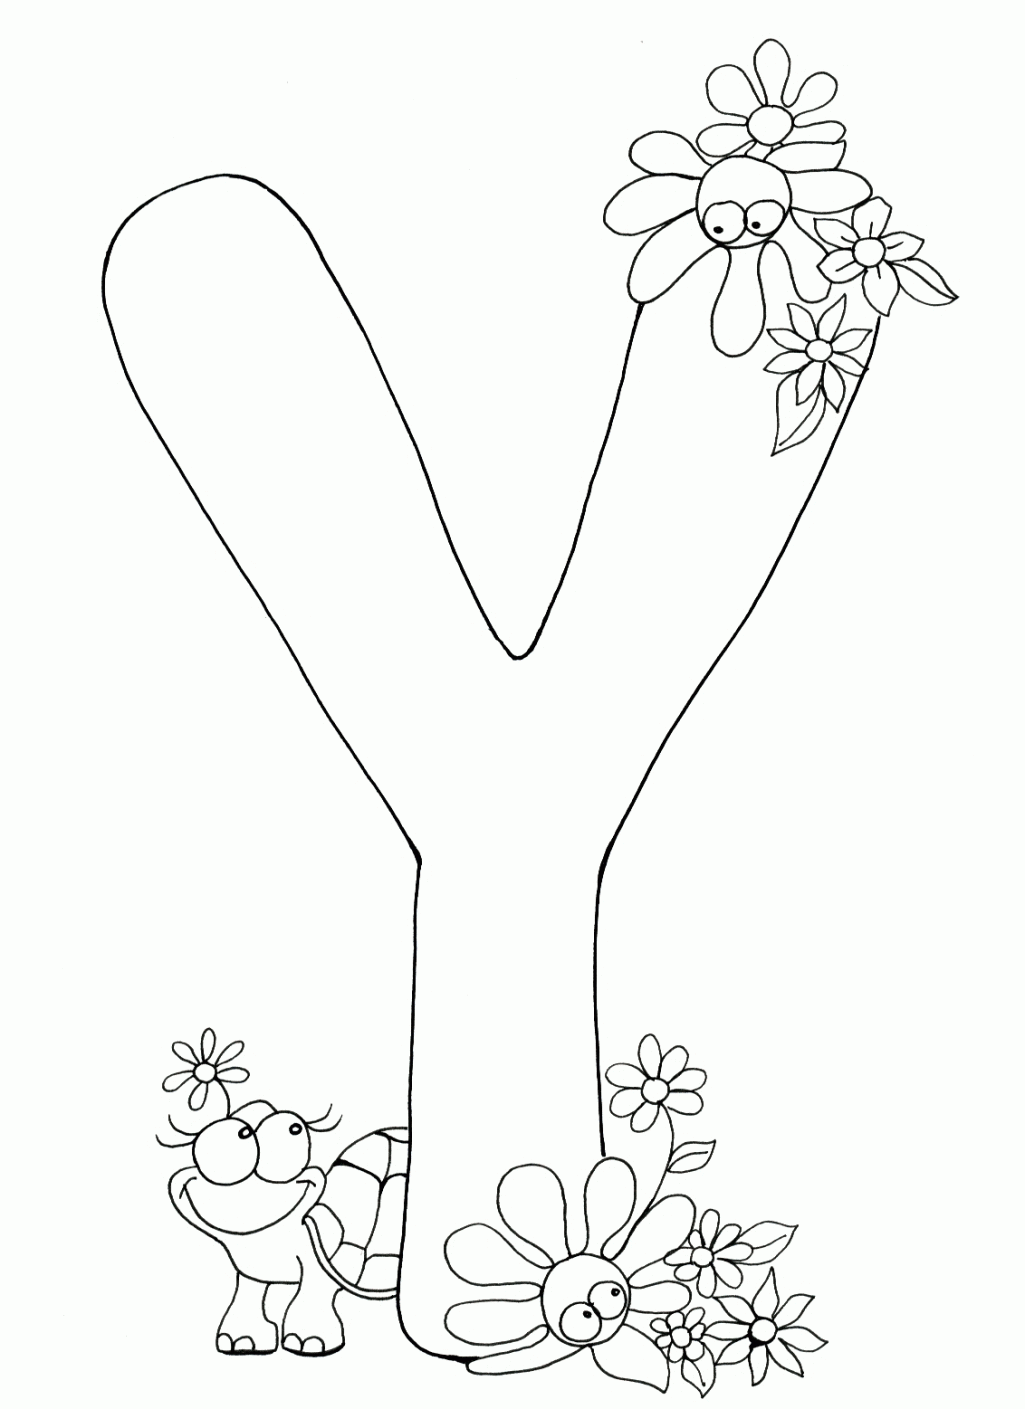 Free letter y coloring pages free download free letter y coloring pages free png images free cliparts on clipart library